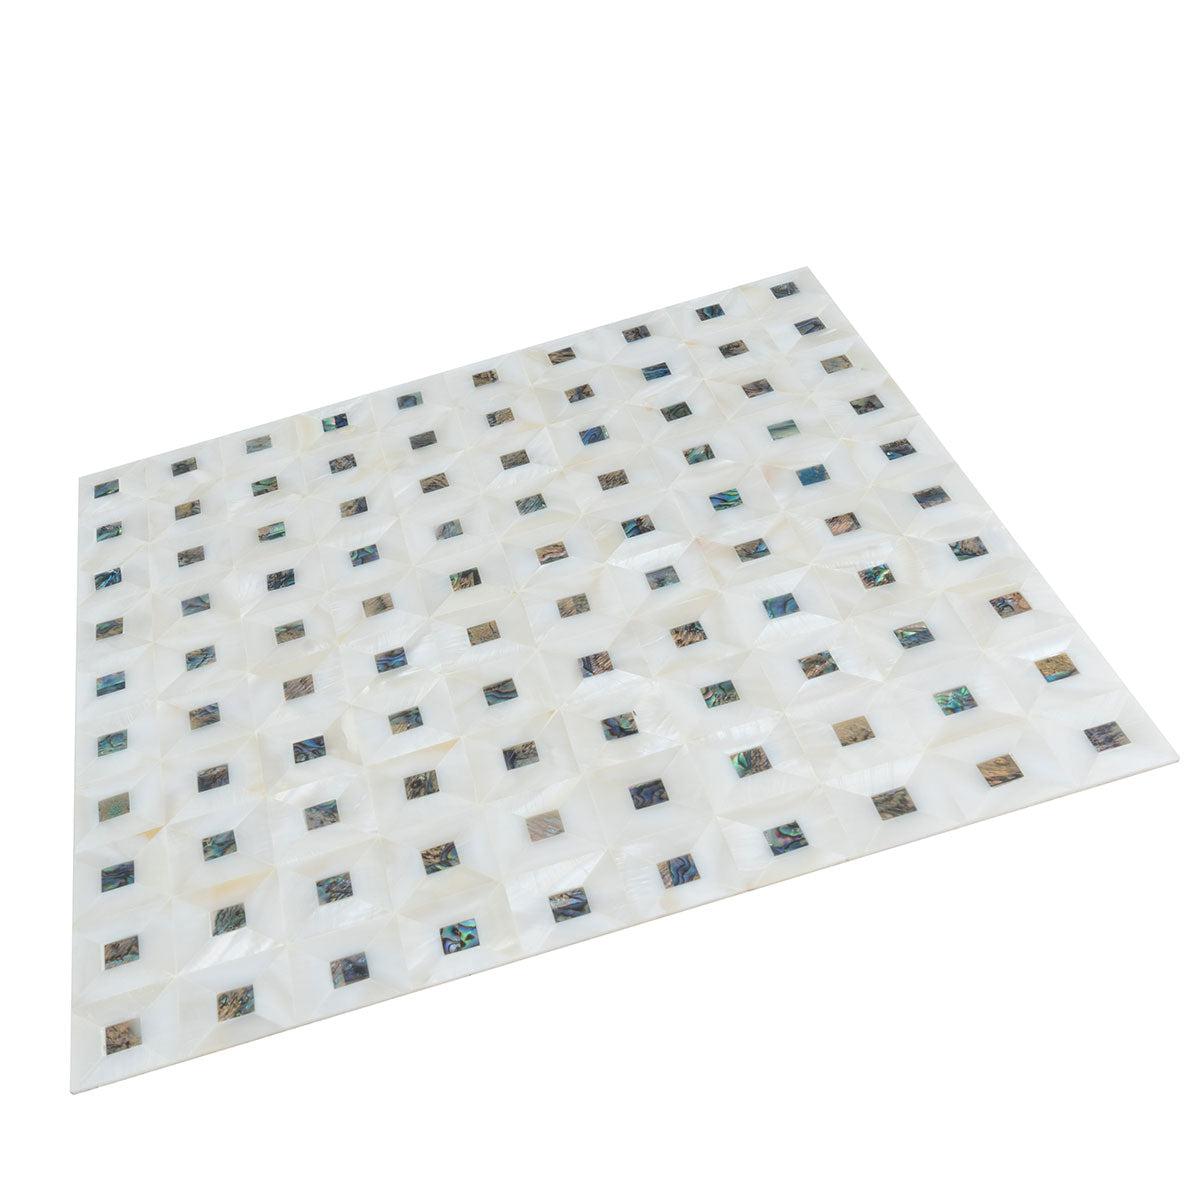 Mother Of Pearl Abalone Mosaic Tile